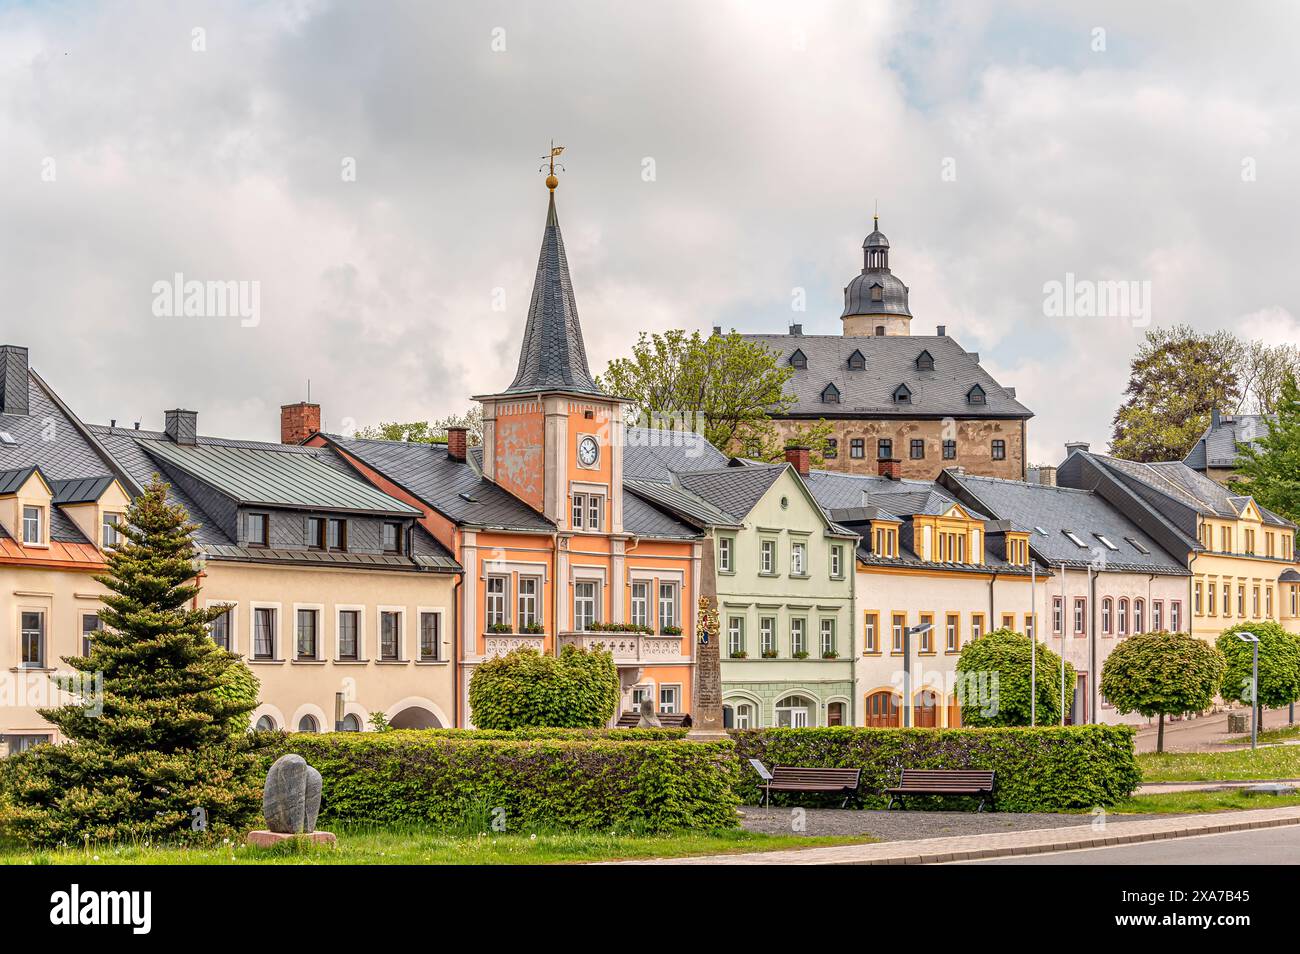 Market square and town hall of Frauenstein, Saxony, Germany Stock Photo